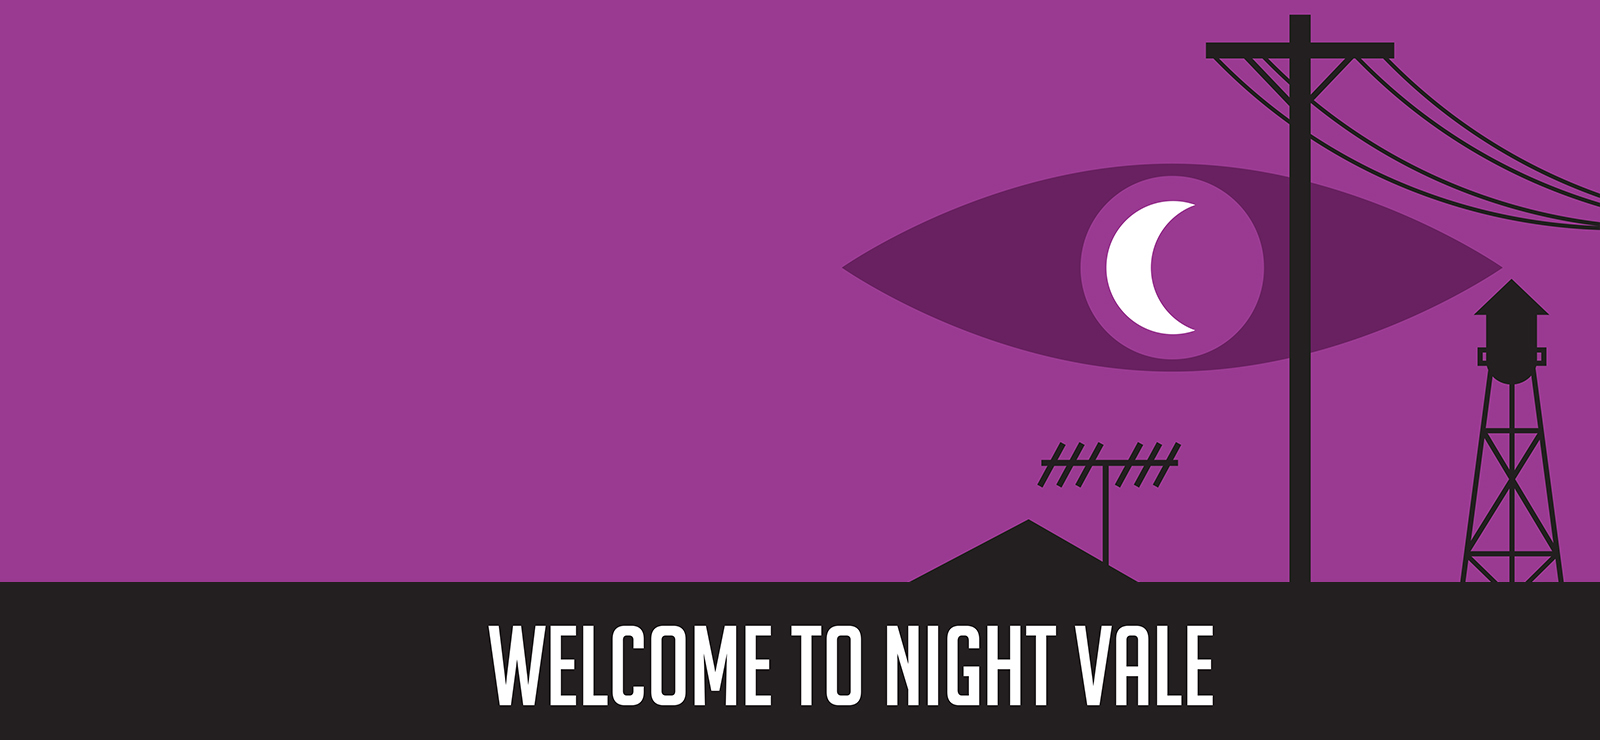 Visit http://fishercenter.bard.edu/events/WELCOME-TO-NIGHT-VALE